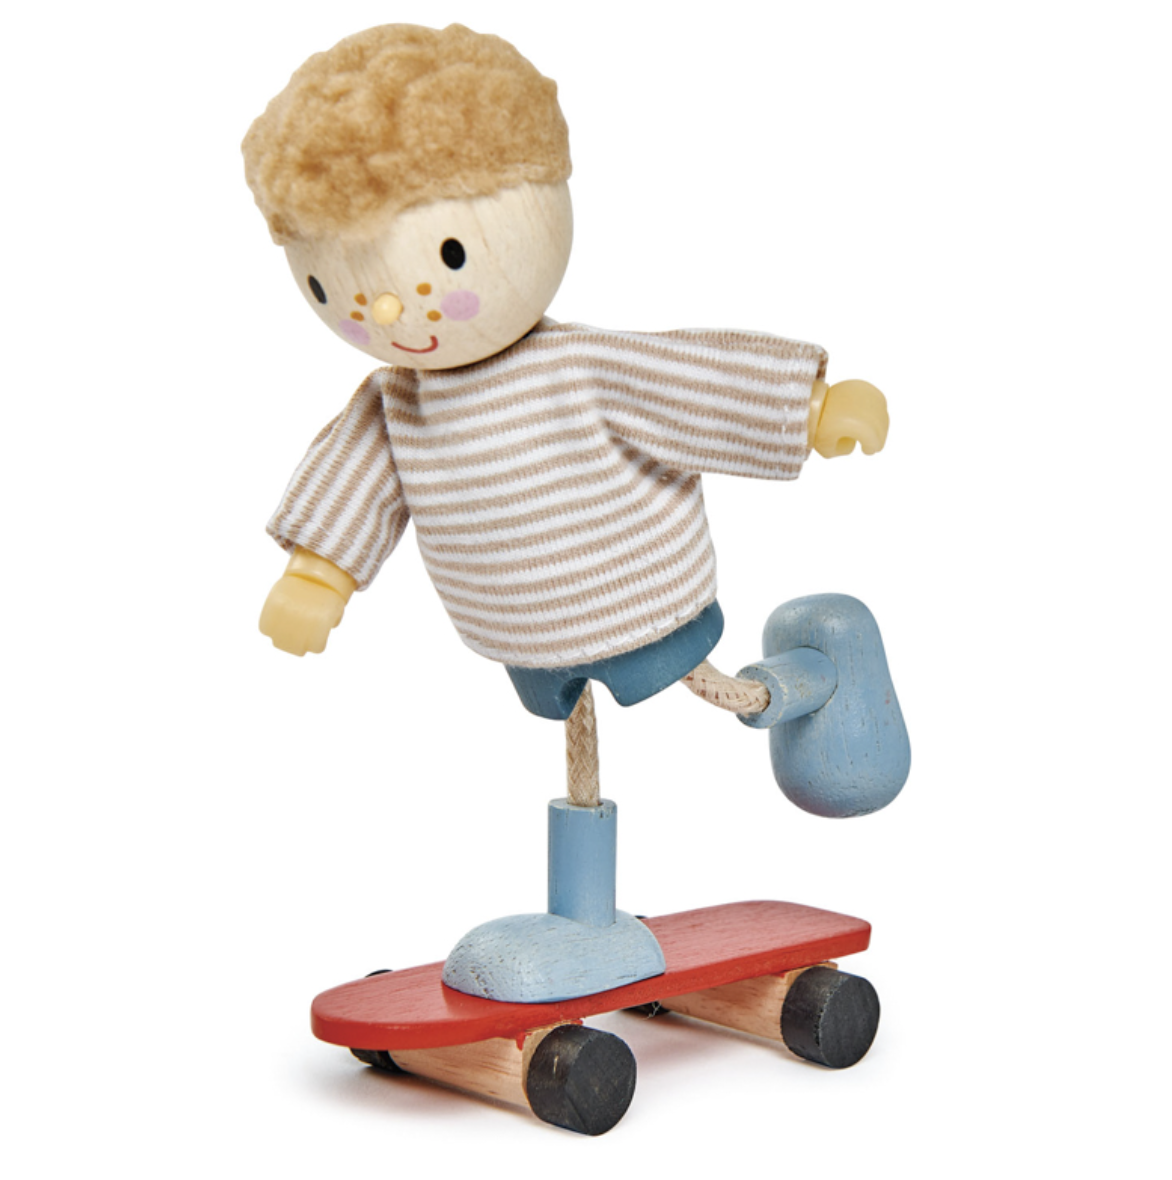 Edward with Flexible Limbs and His Skateboard